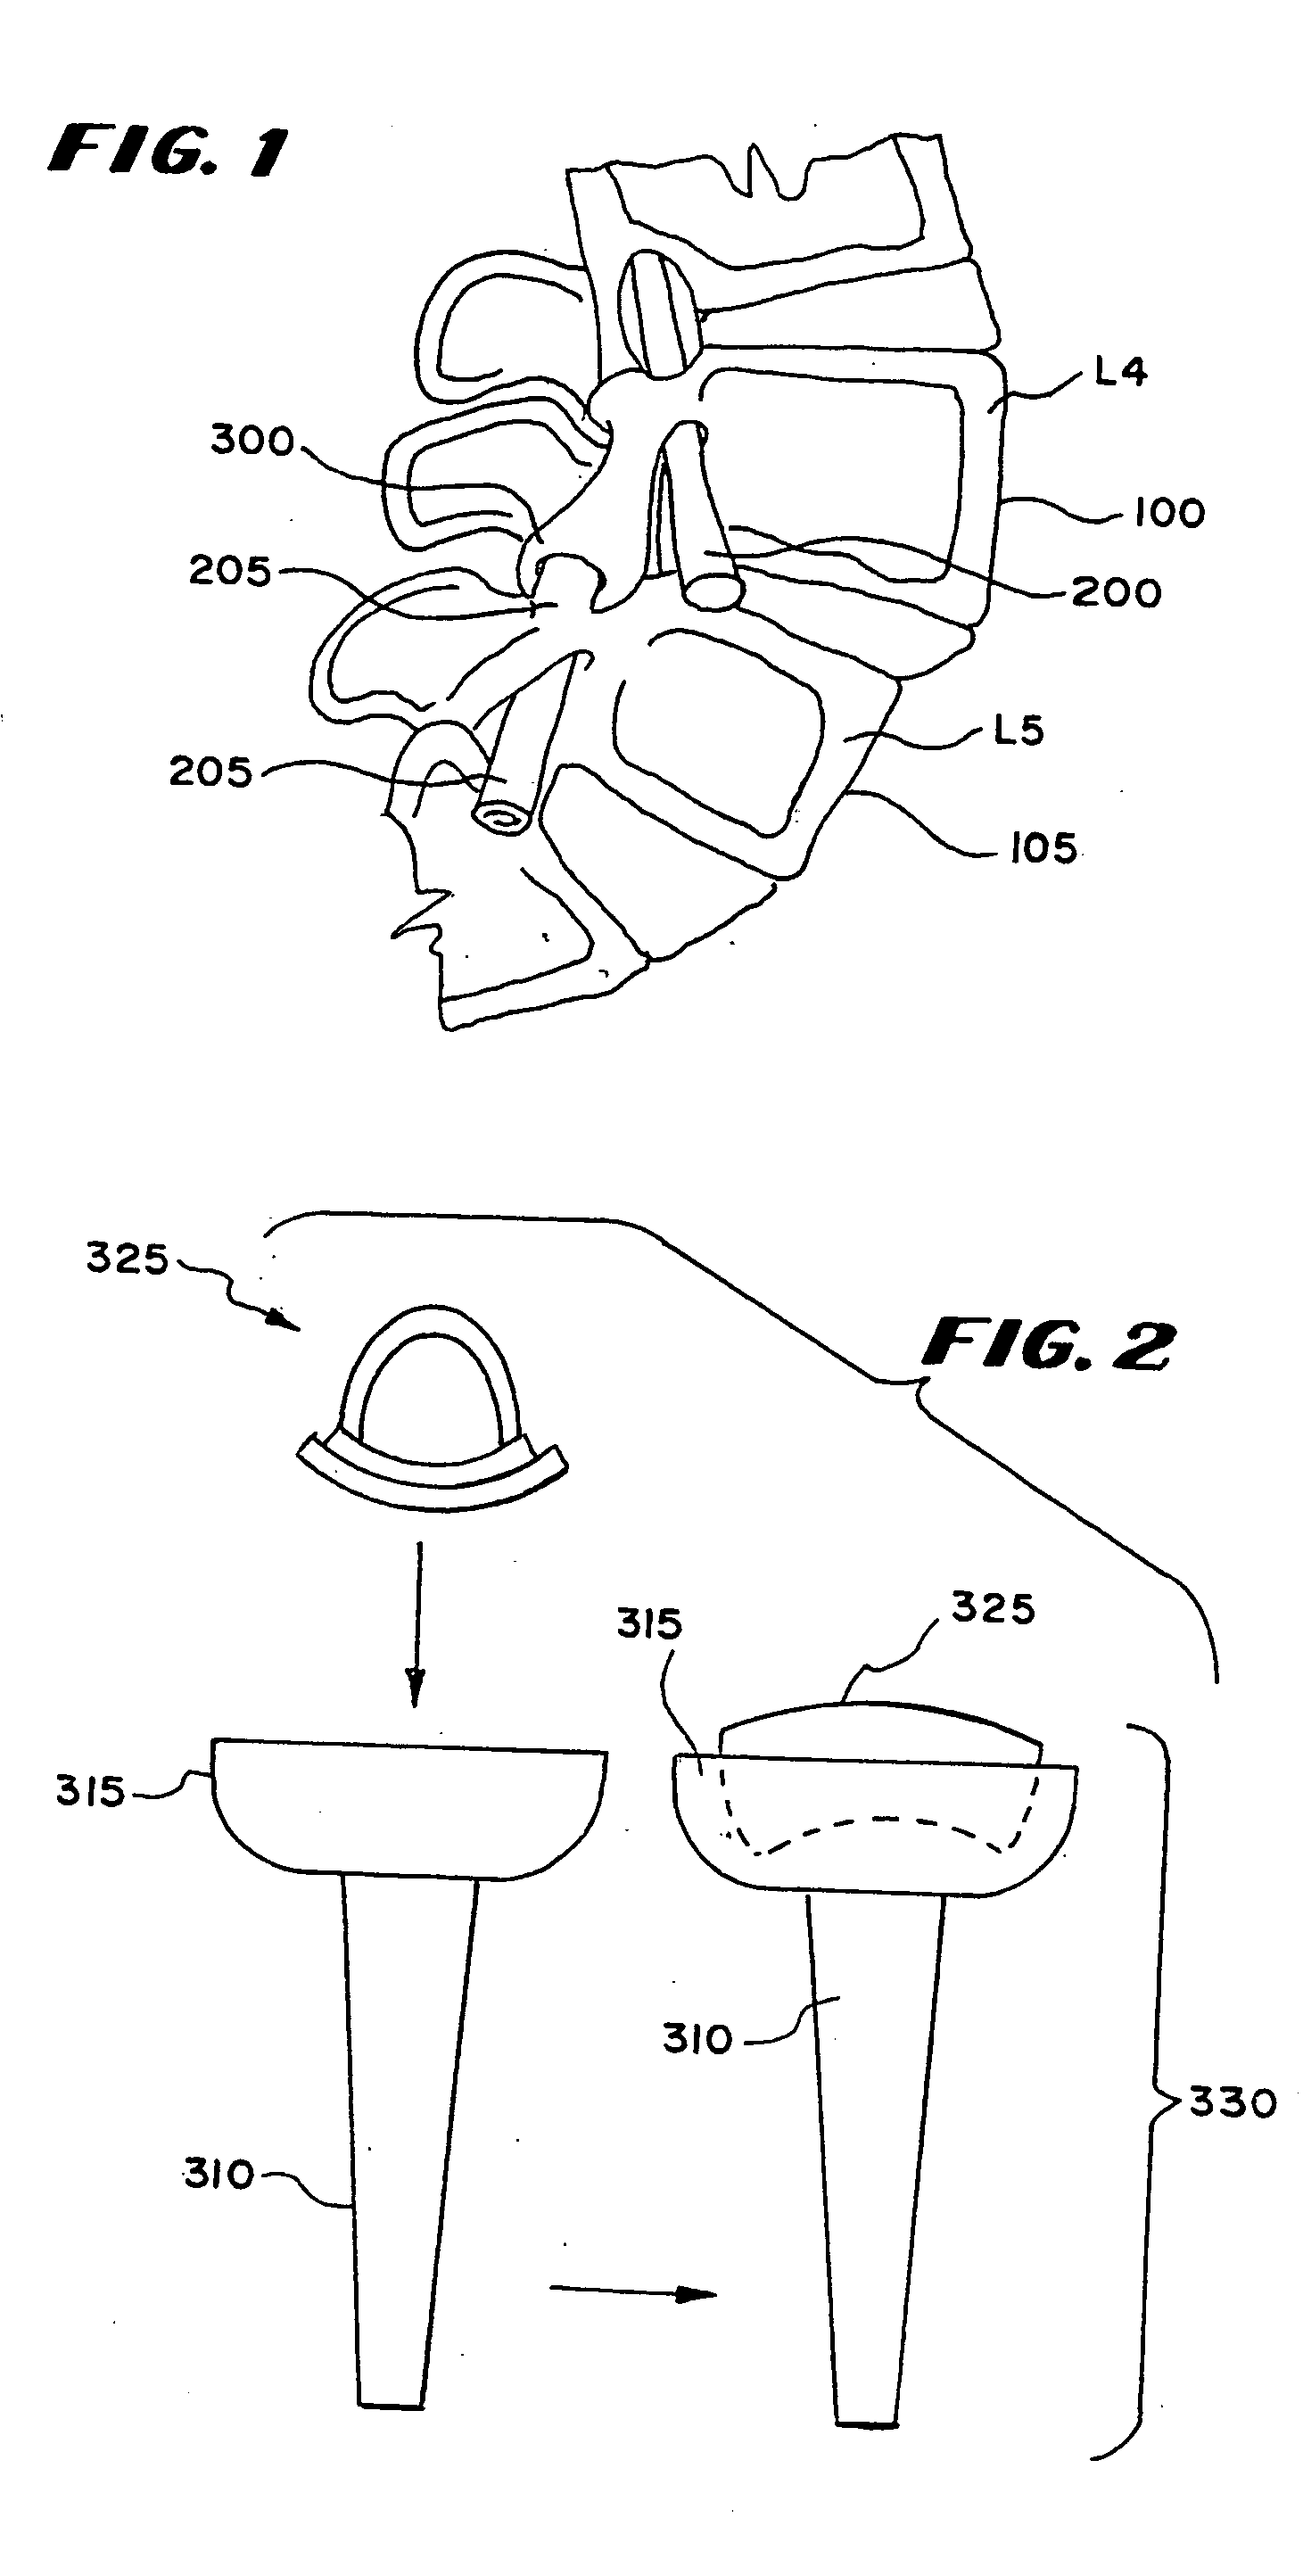 Facet arthroplasty devices and methods